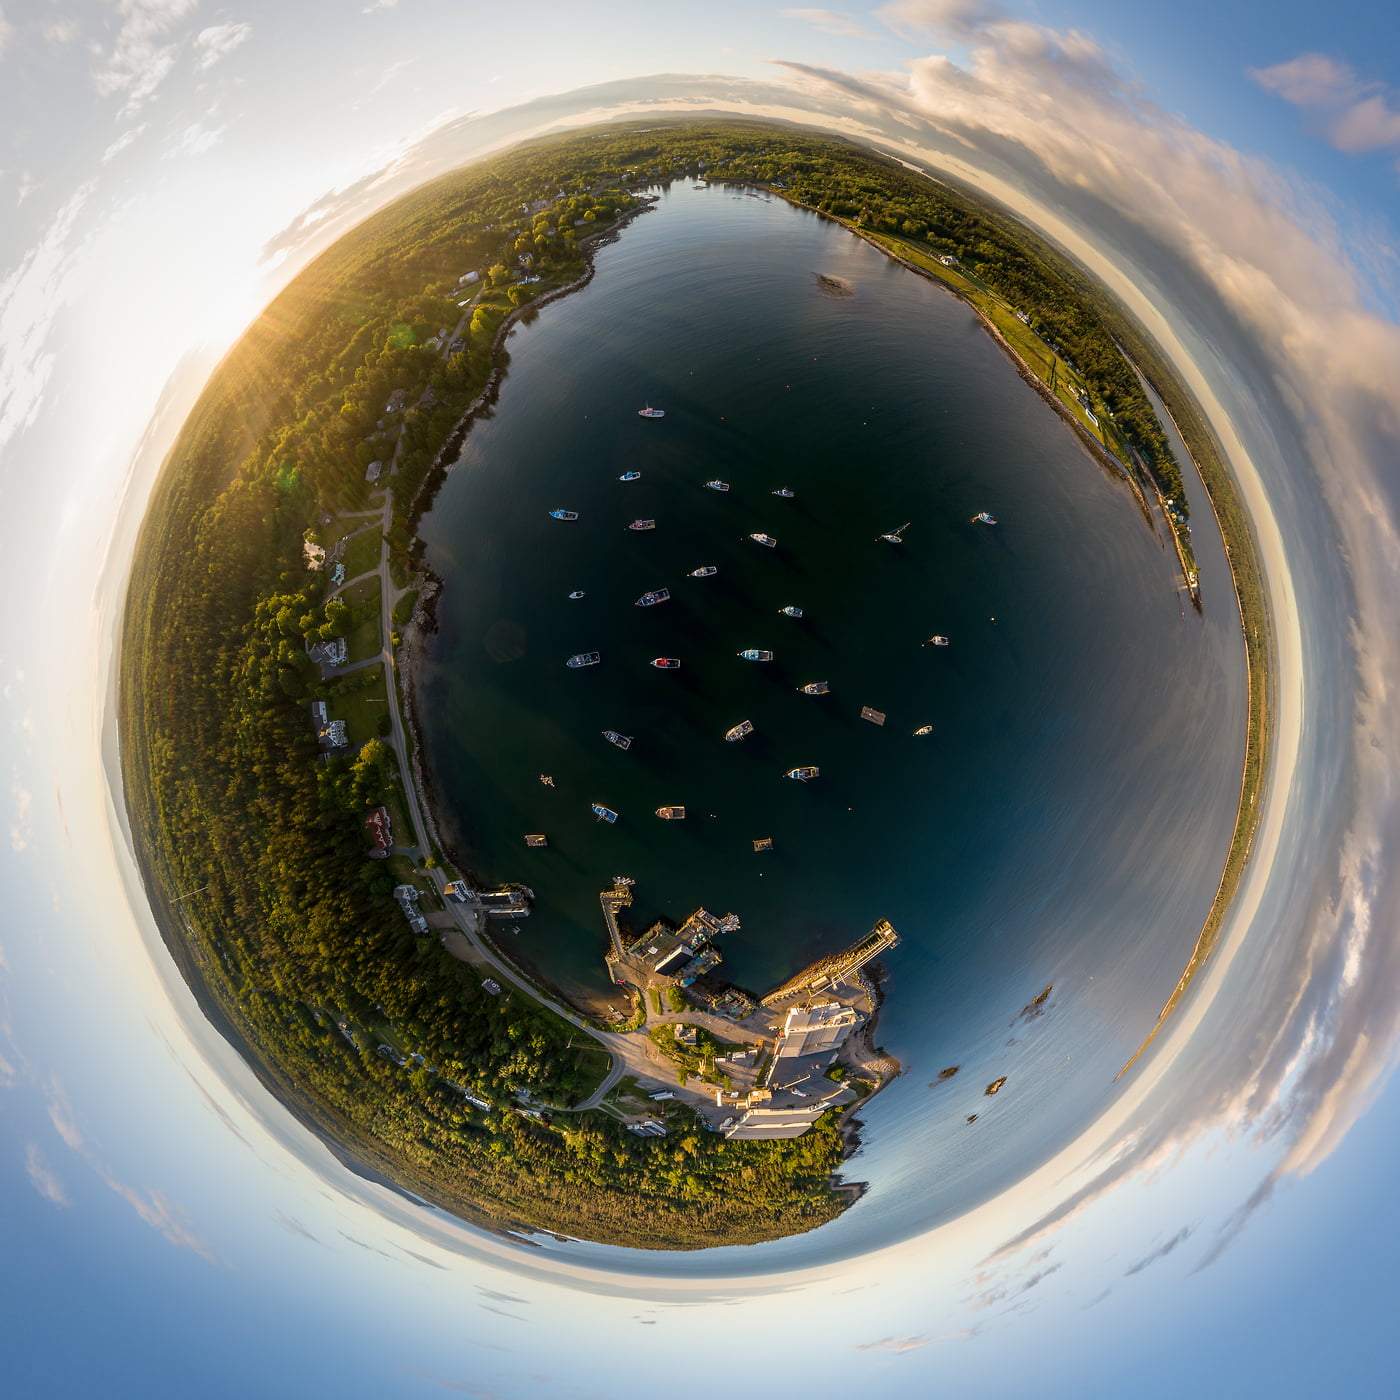 133 megapixels! A very high resolution, large-format artistic 360-degree spherical photo of a New England harbor with boats at sunset; abstract fine art photograph created by Aaron Priest in Prospect Harbor, Maine